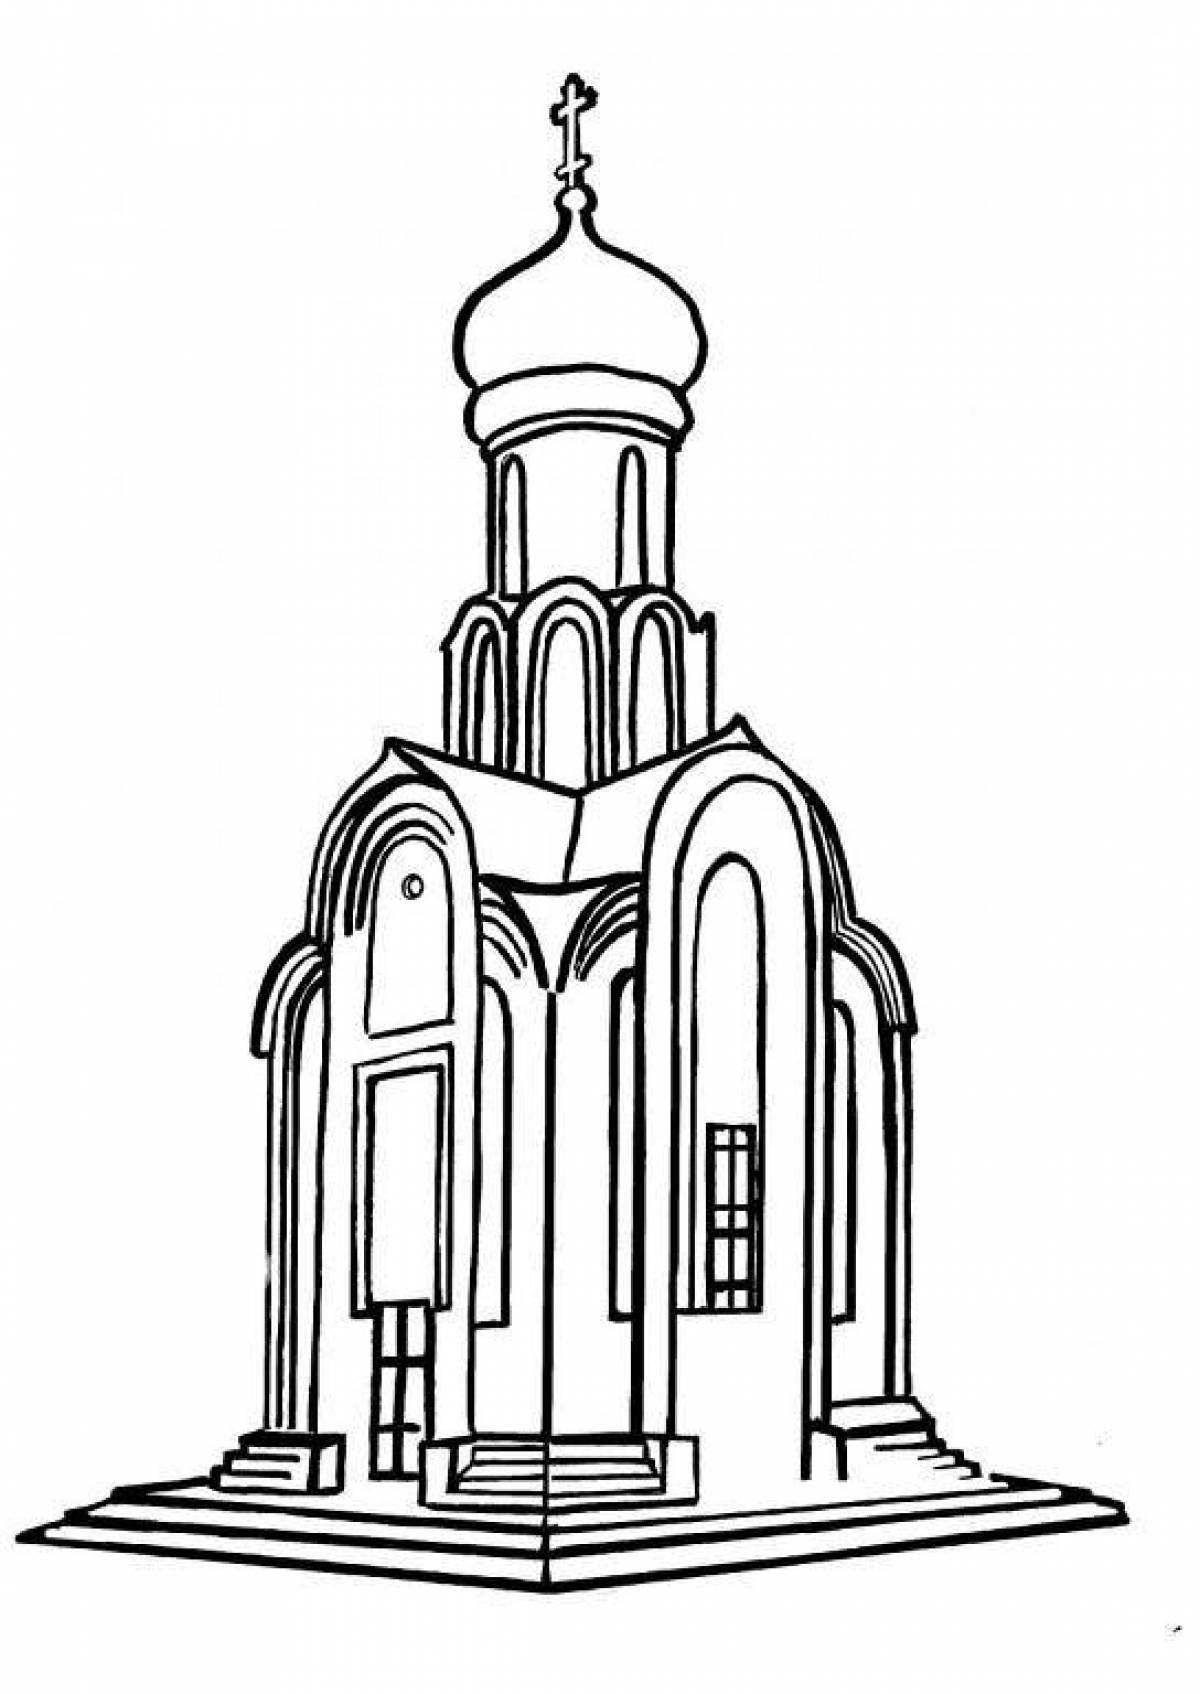 Playful temple coloring page for kids